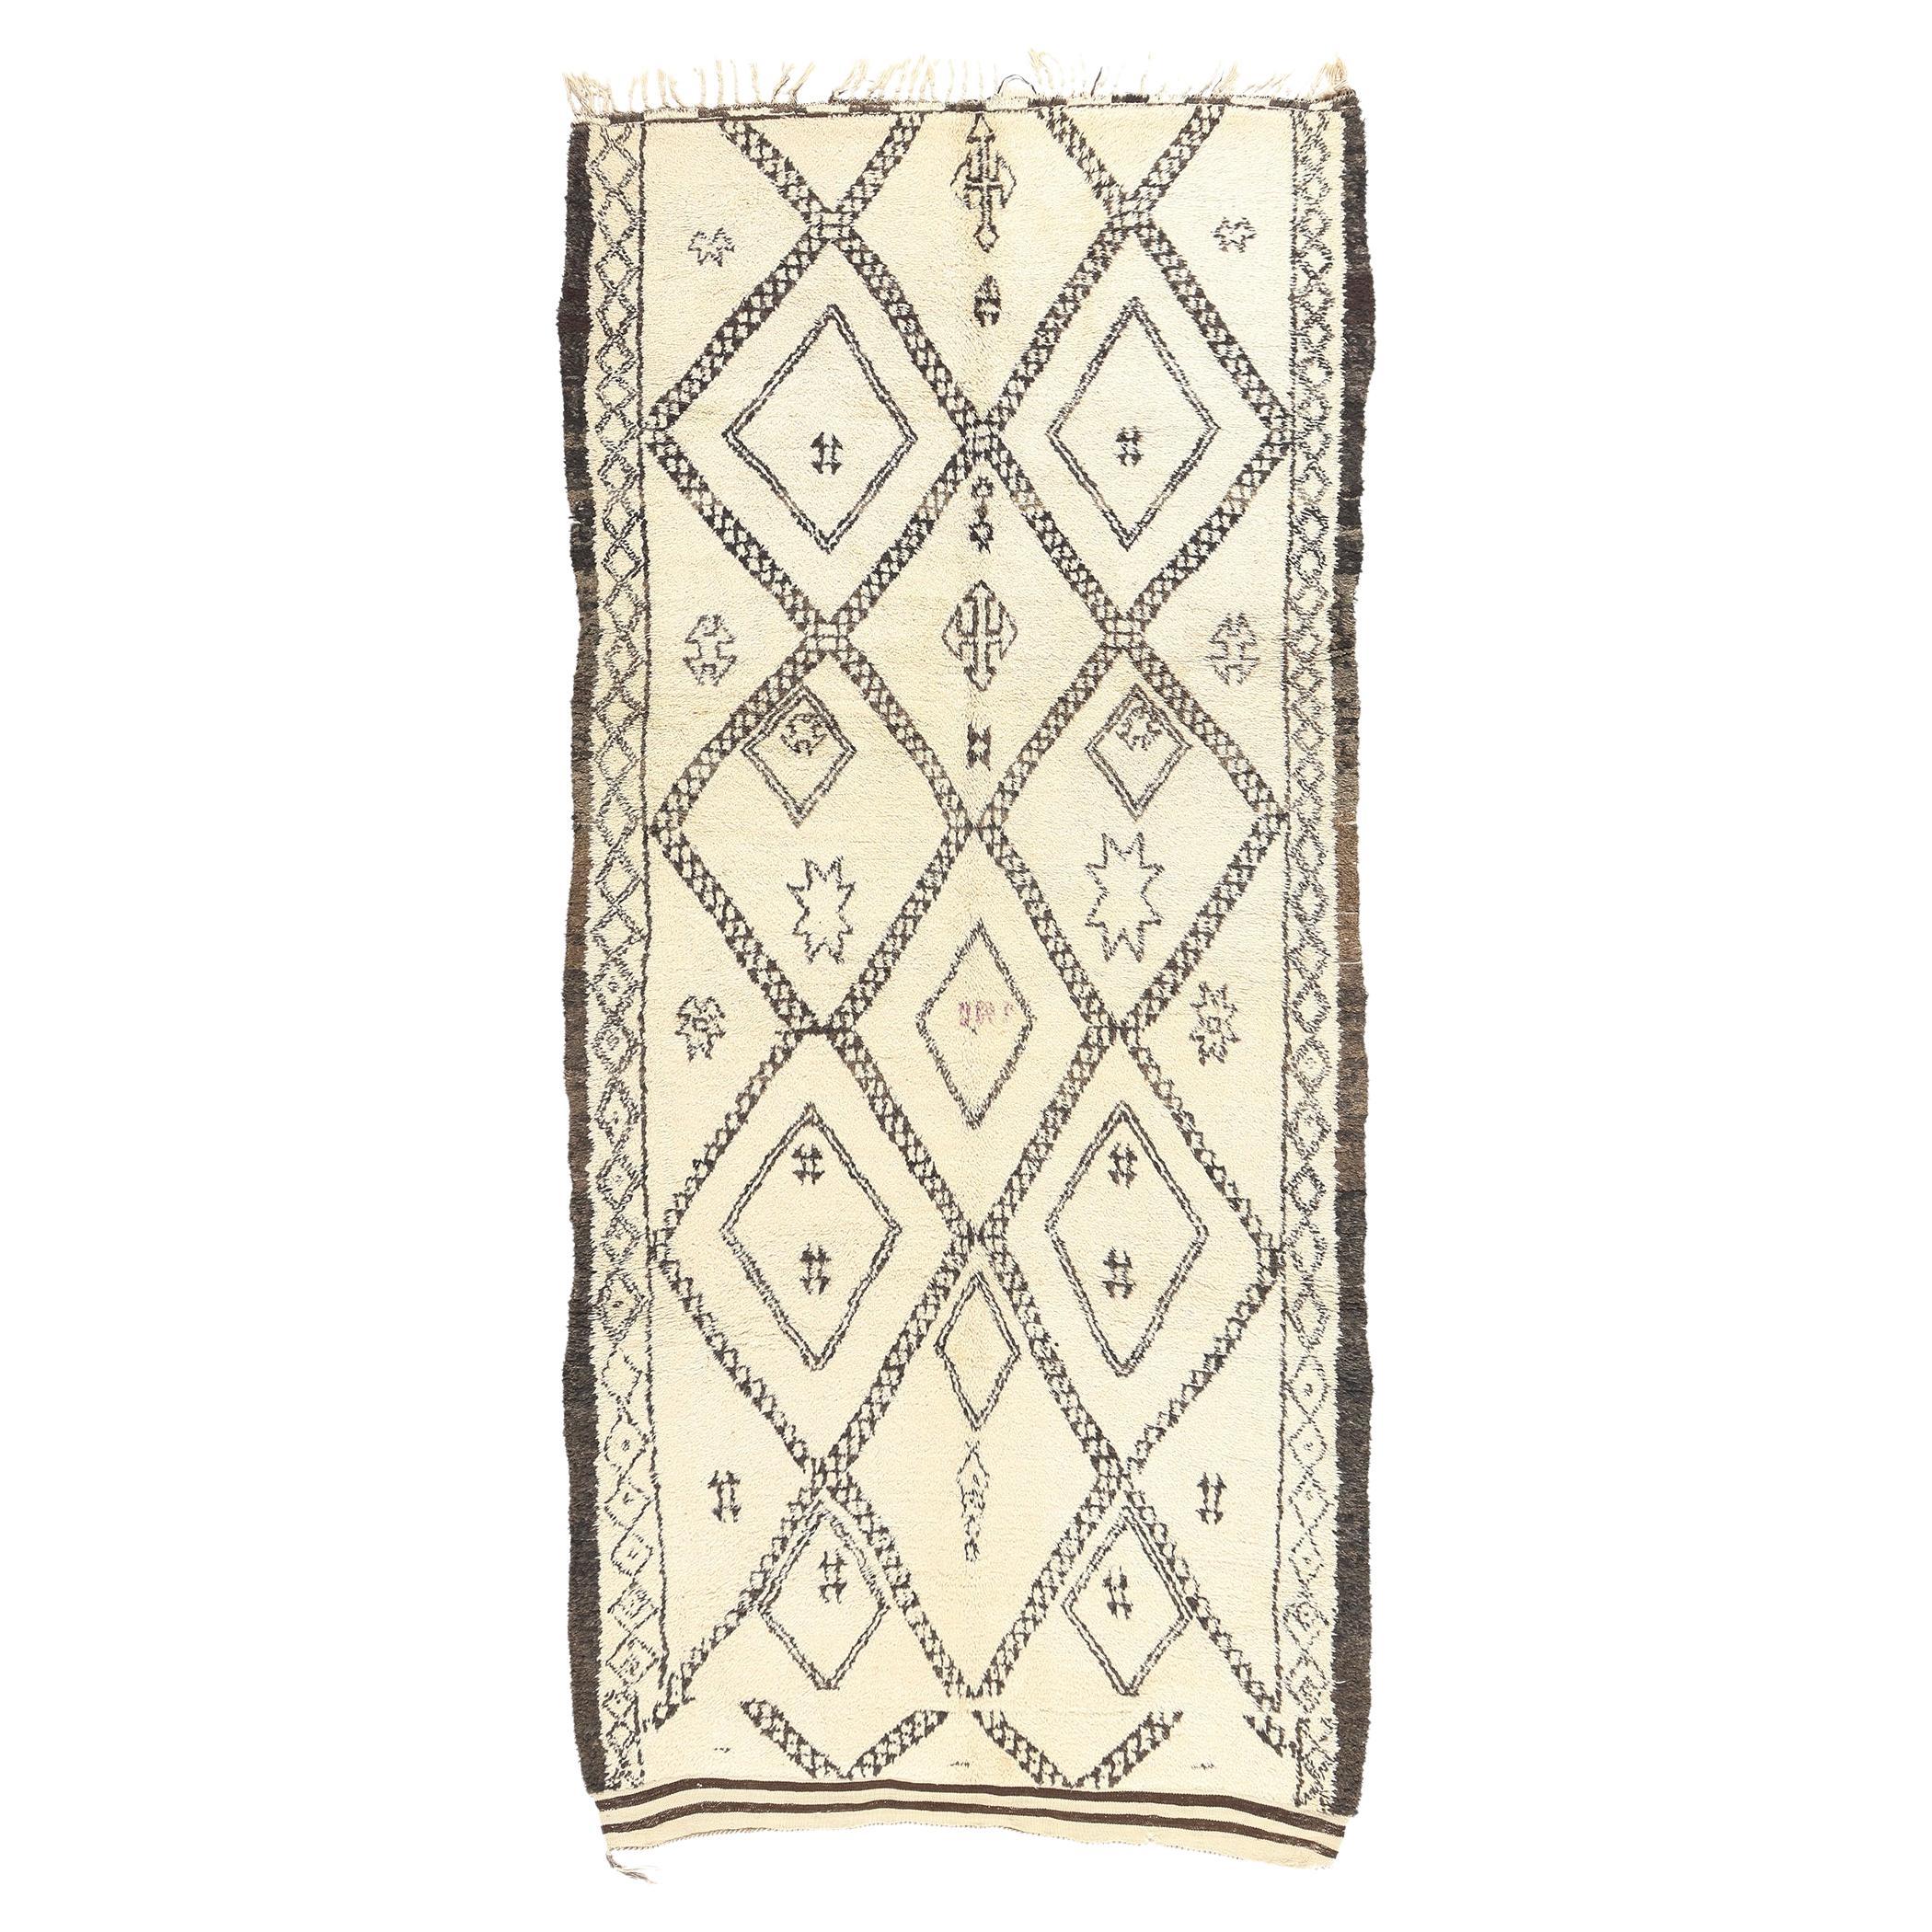 Vintage Beni Ourain Moroccan Rug, Mid-Century Modern Meets Tribal Enchantment